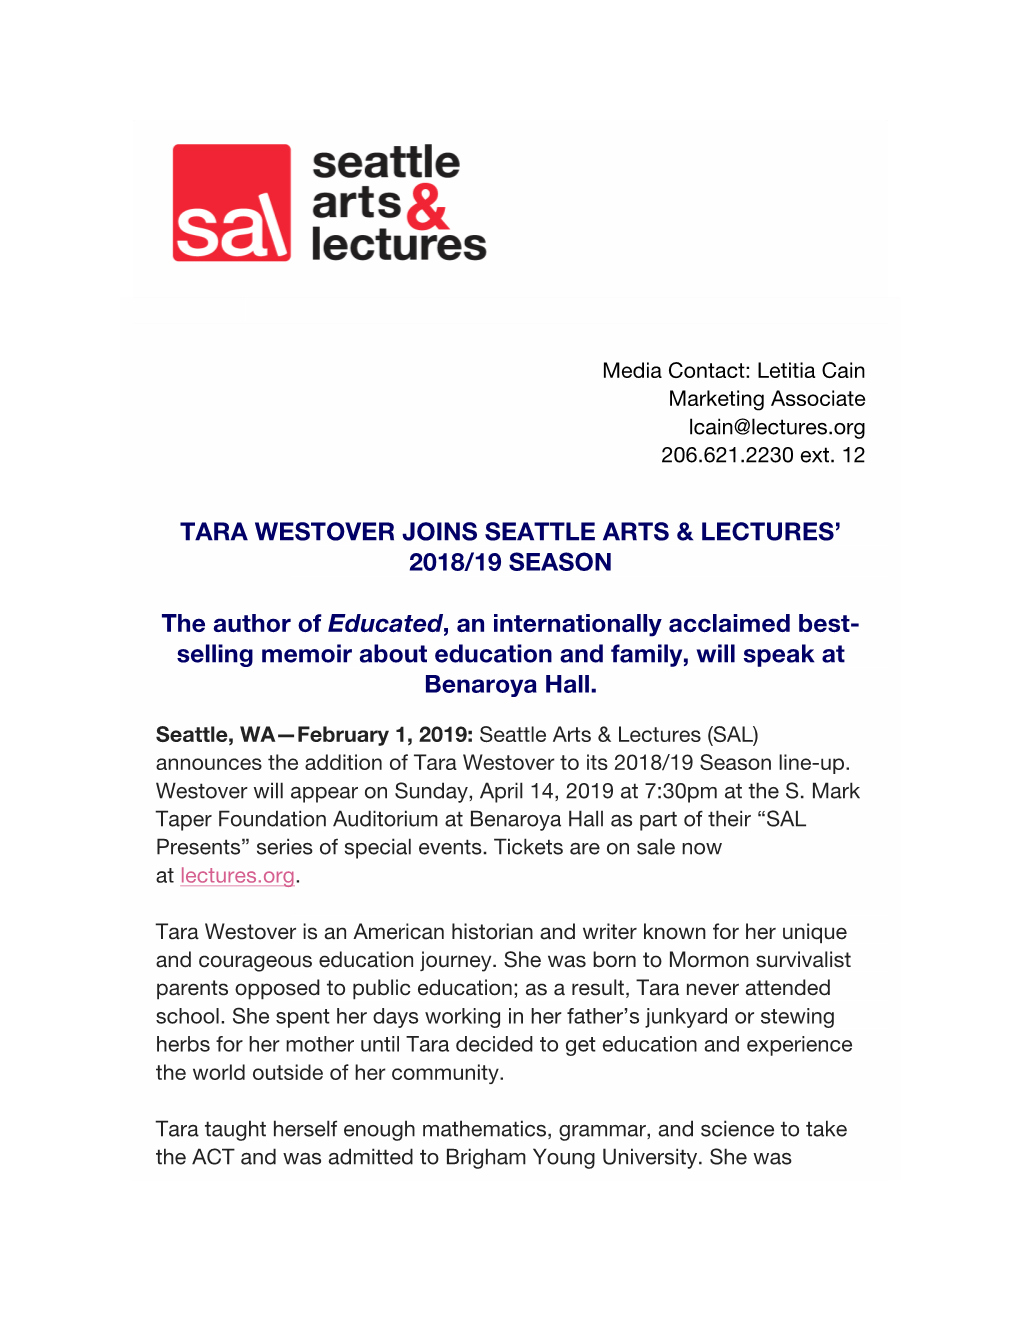 TARA WESTOVER JOINS SEATTLE ARTS & LECTURES' 2018/19 SEASON the Author of Educated, an Internationally Acclaimed Best